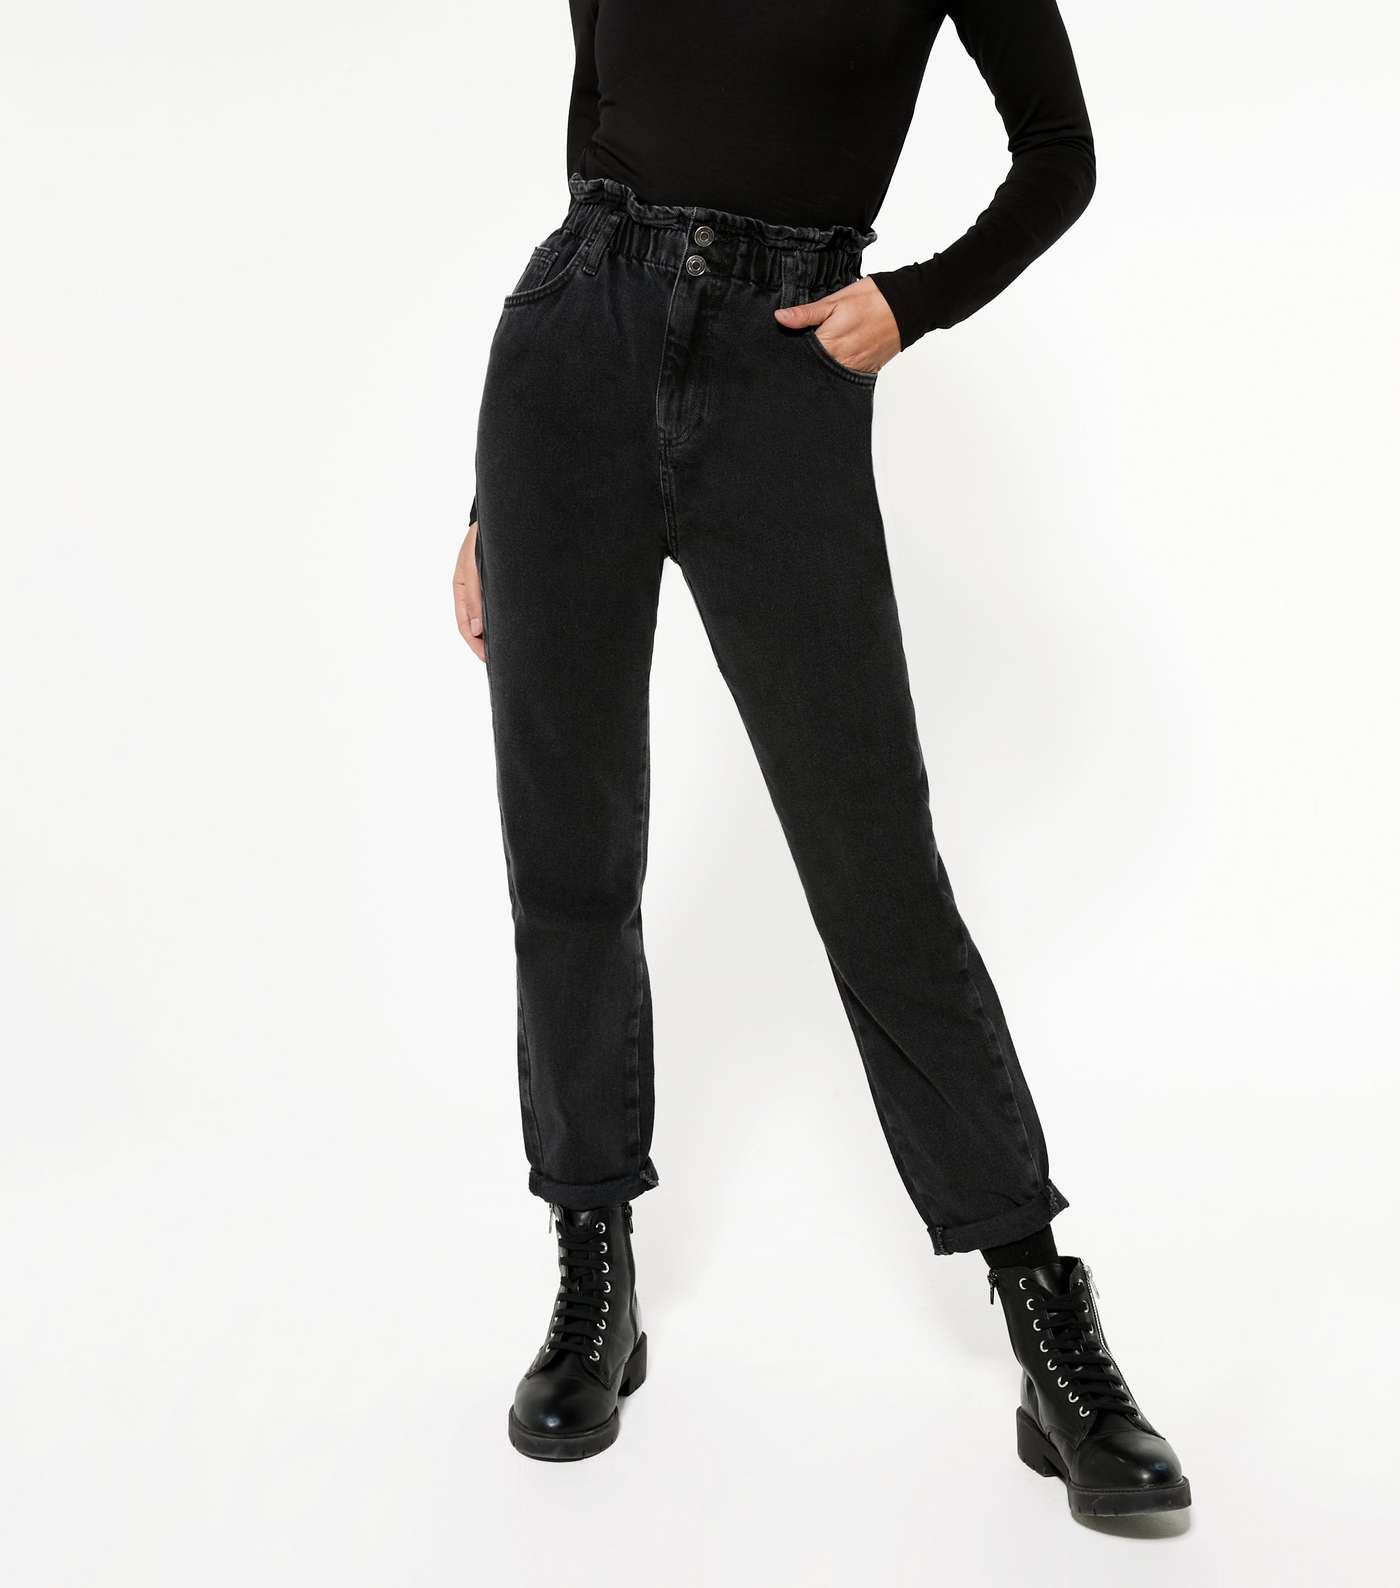 Black Elasticated High Waist Dayna Tapered Jeans Image 2